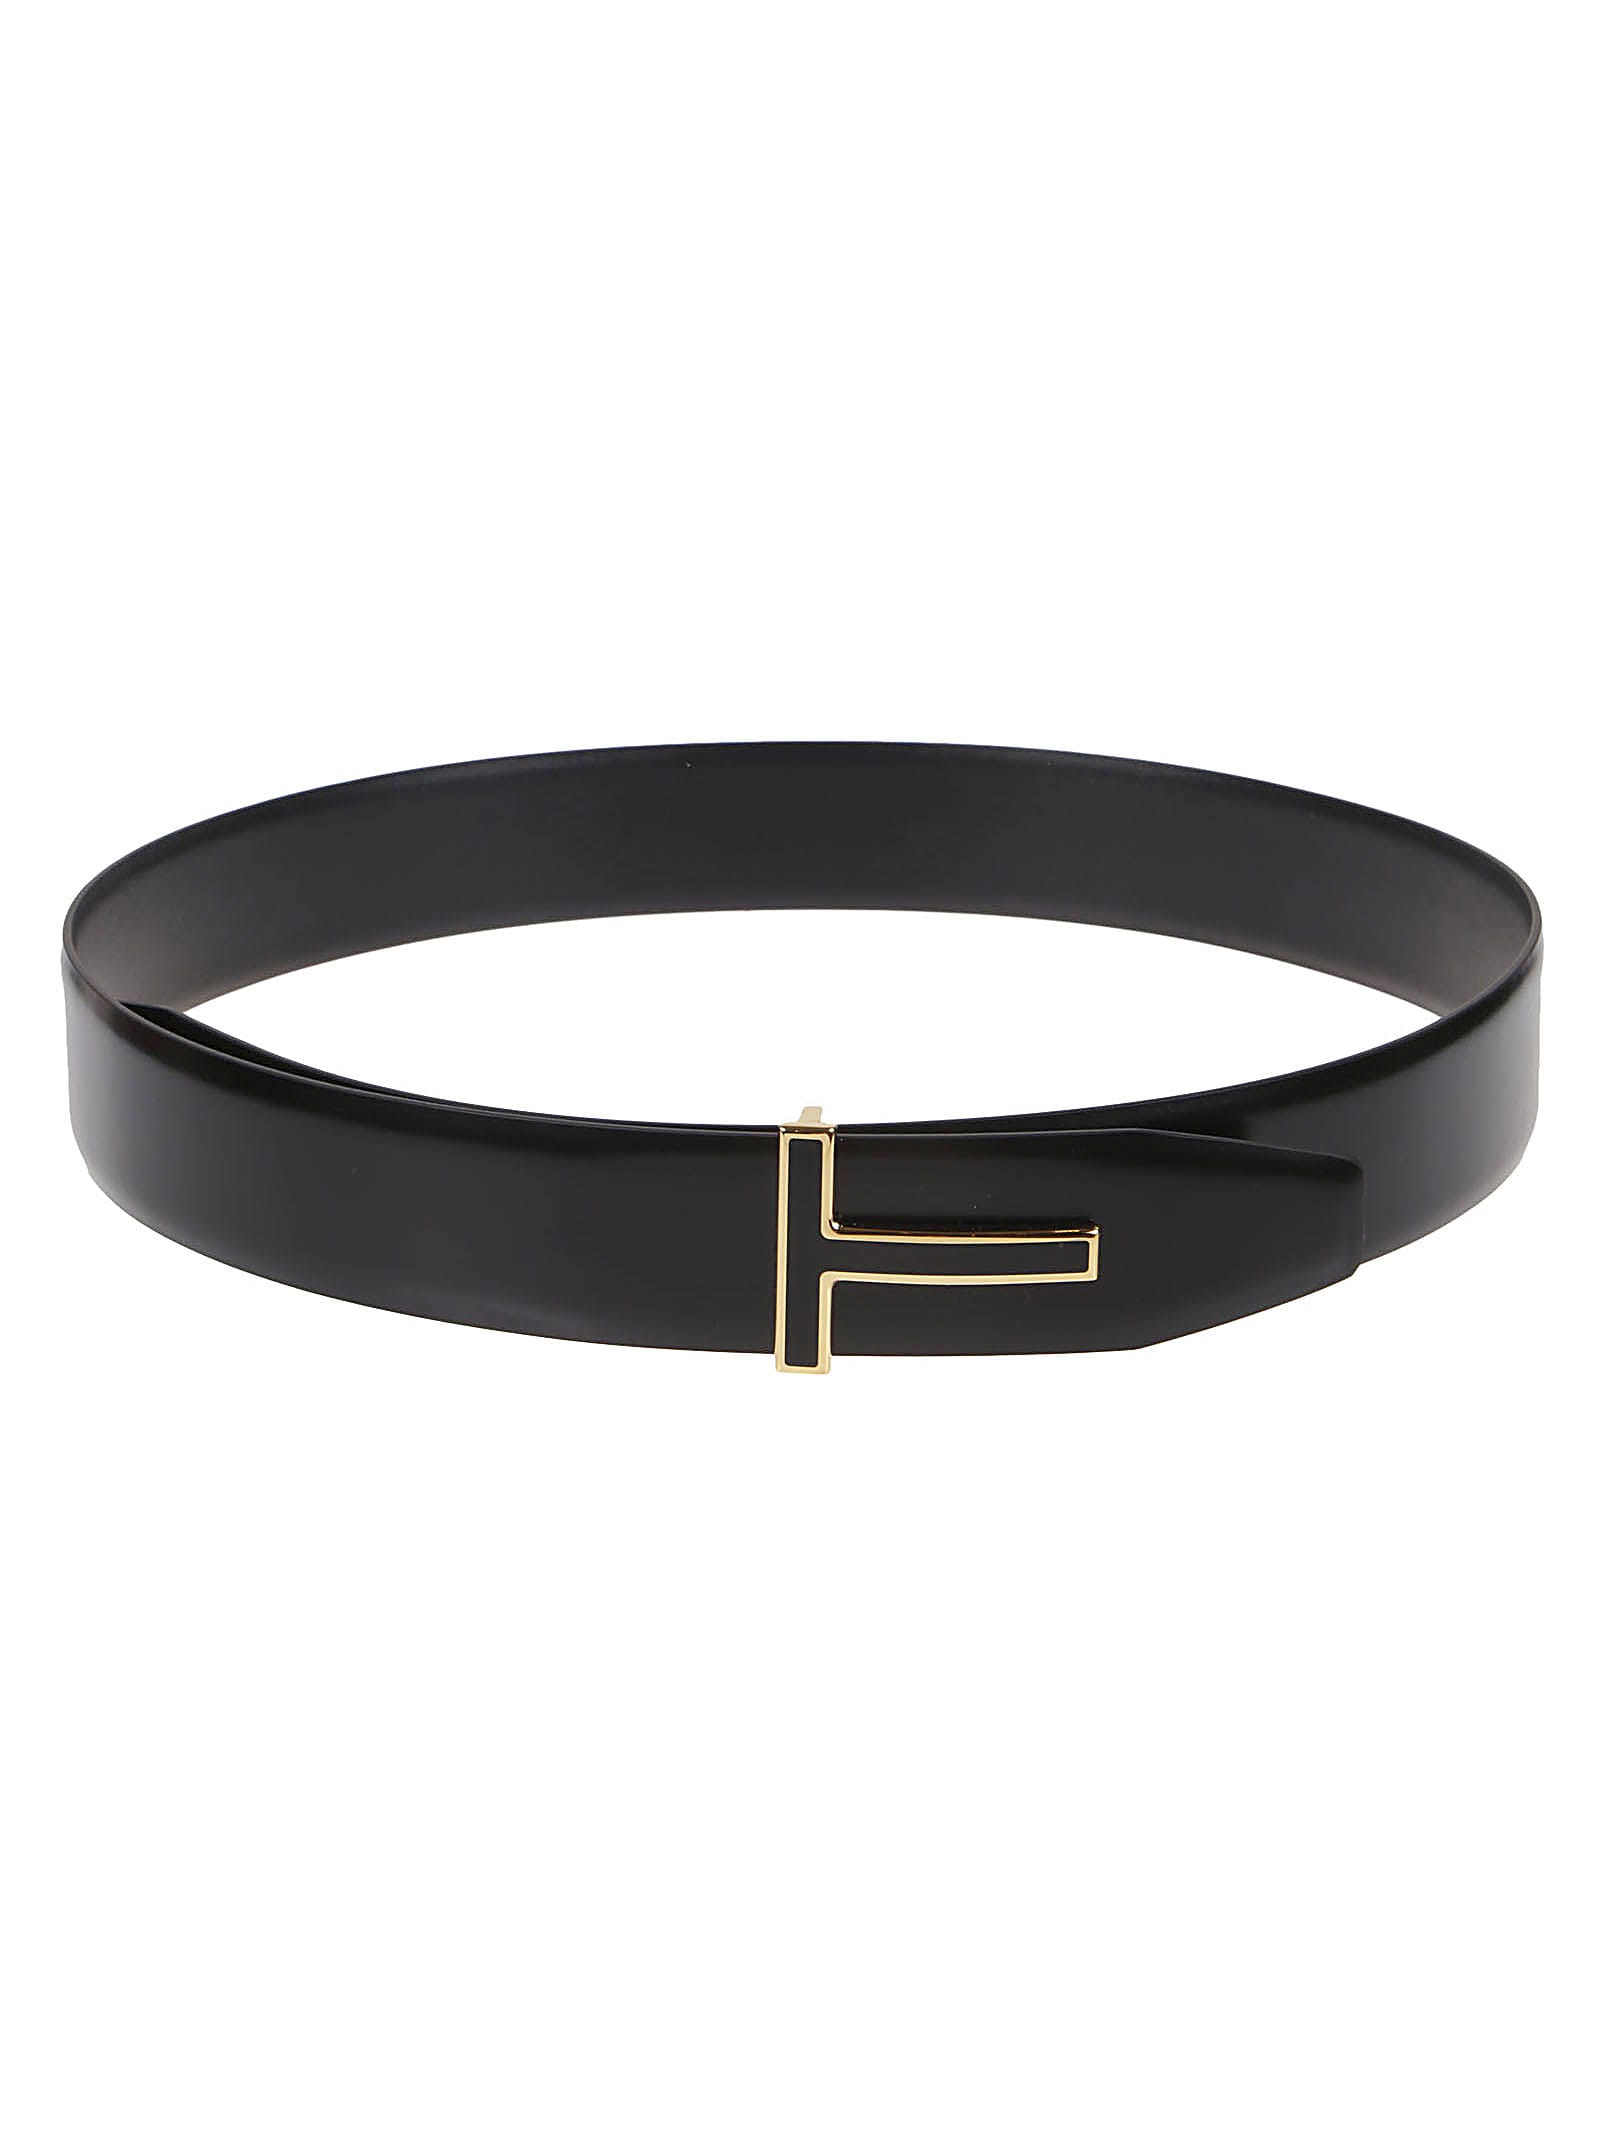 Tom Ford T-buckle Belt | italist